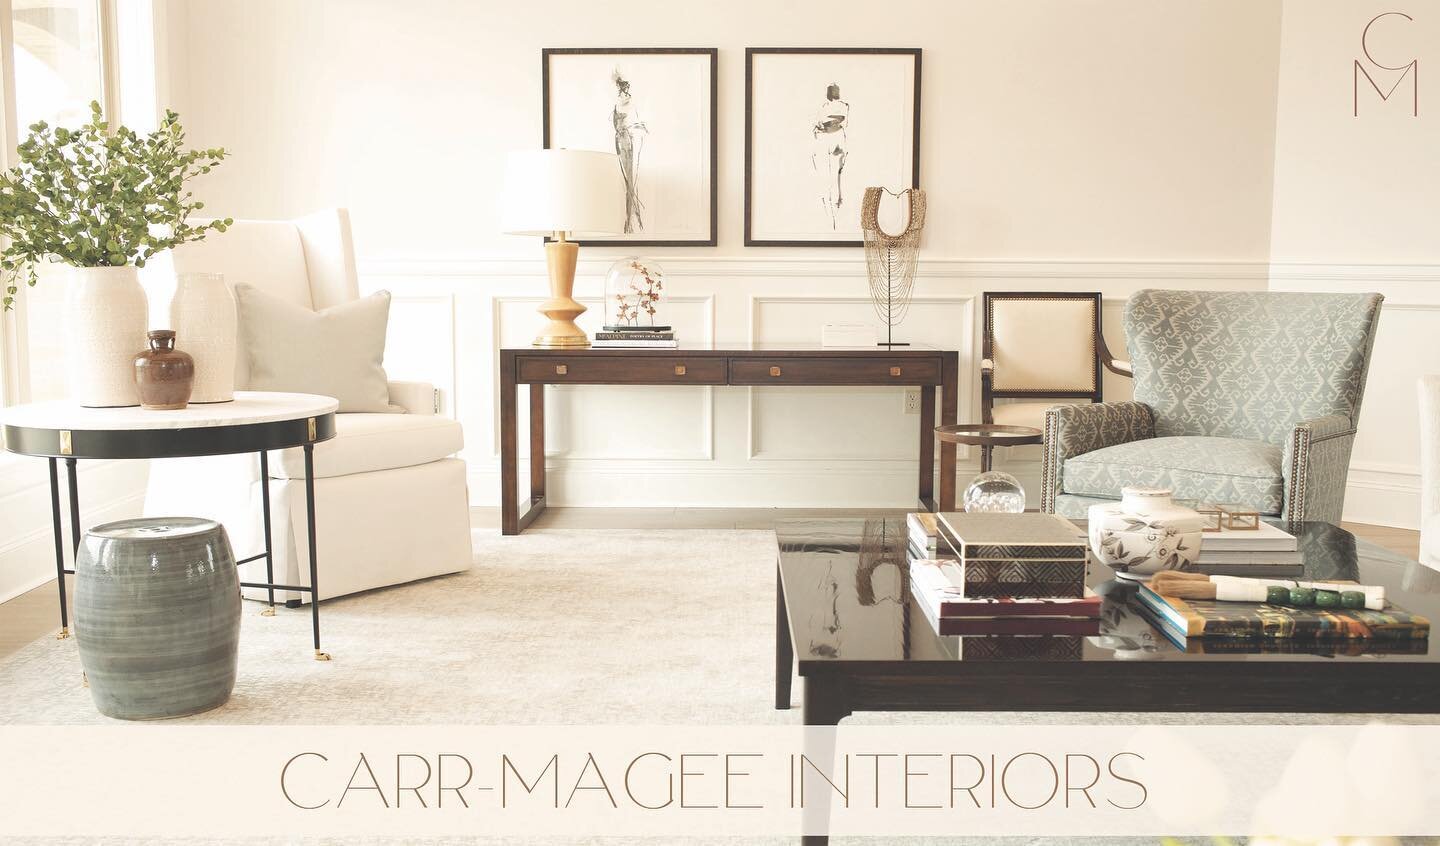 Our favorite install to date. The perfect clients that just told us to do what we do and make it beautiful, you can&rsquo;t ask for much more than that. #carrmageeinteriors #interiordesign  #interiordesigner #mississippi  #mississippiinteriordesigner